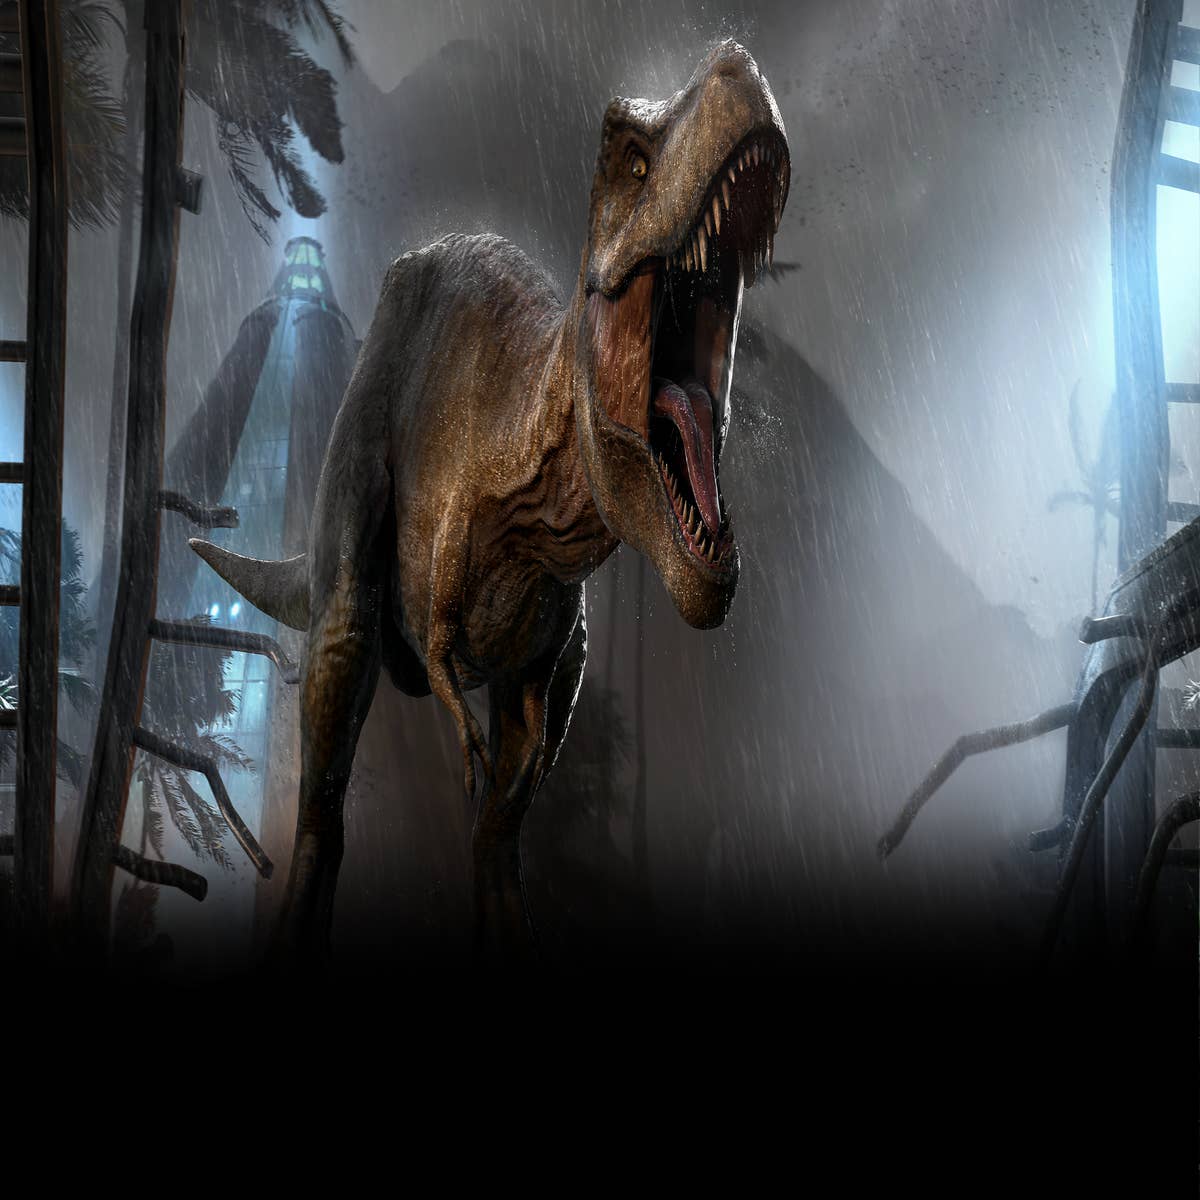 T-Rex Dinosaur Game | Download and Buy Today - Epic Games Store